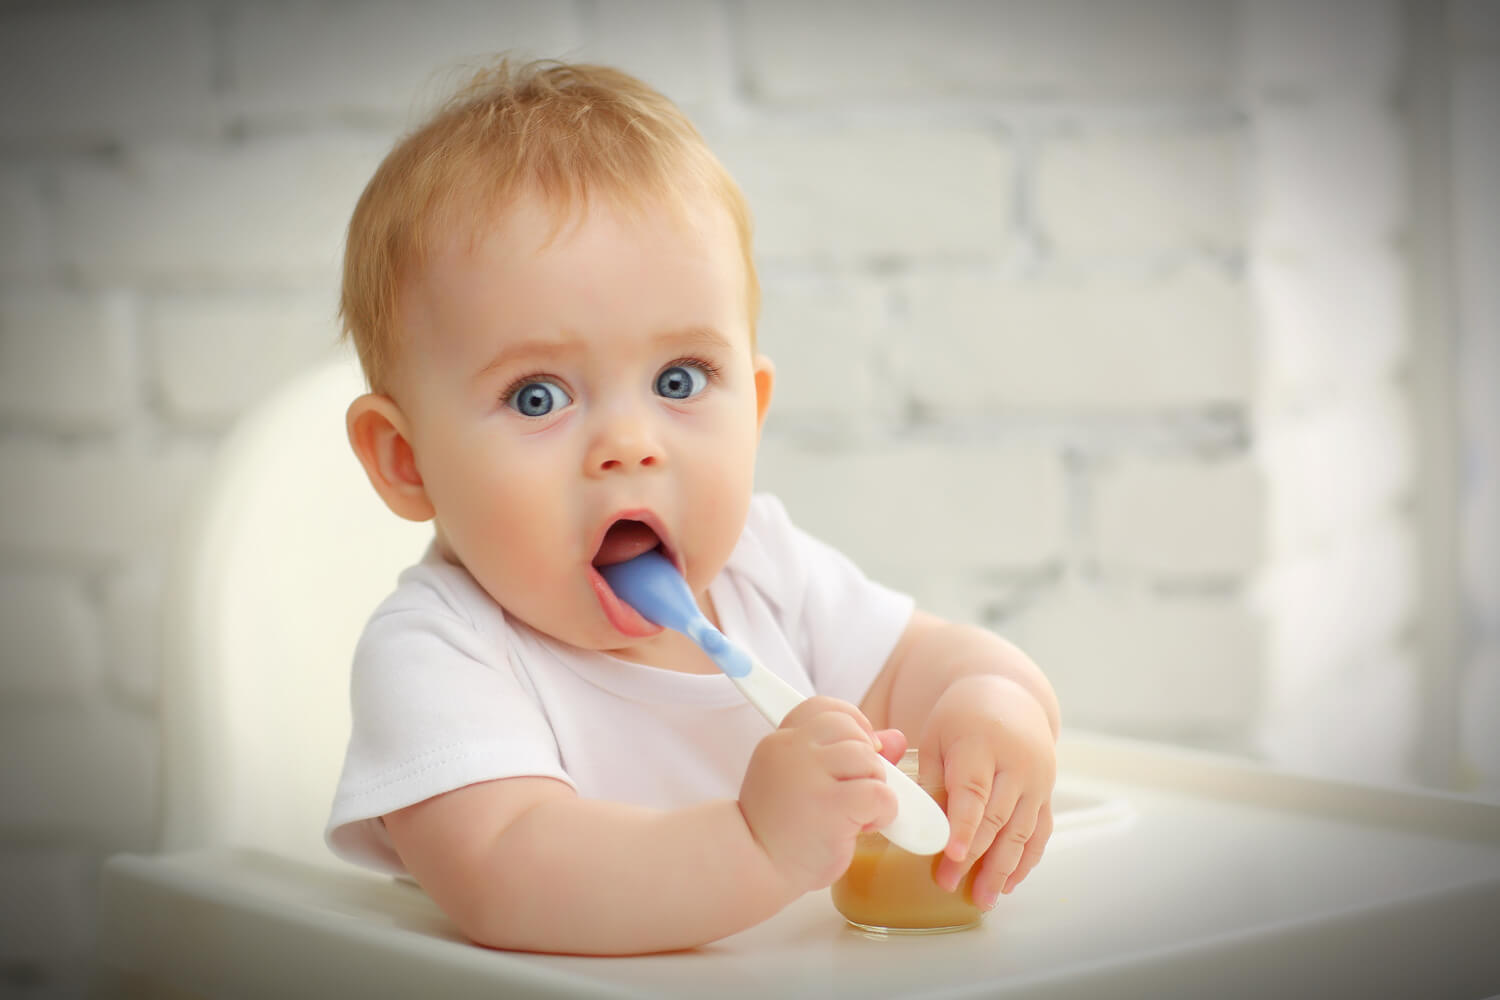 Should I Make Any Preparation to Introduce Solids to My Baby?